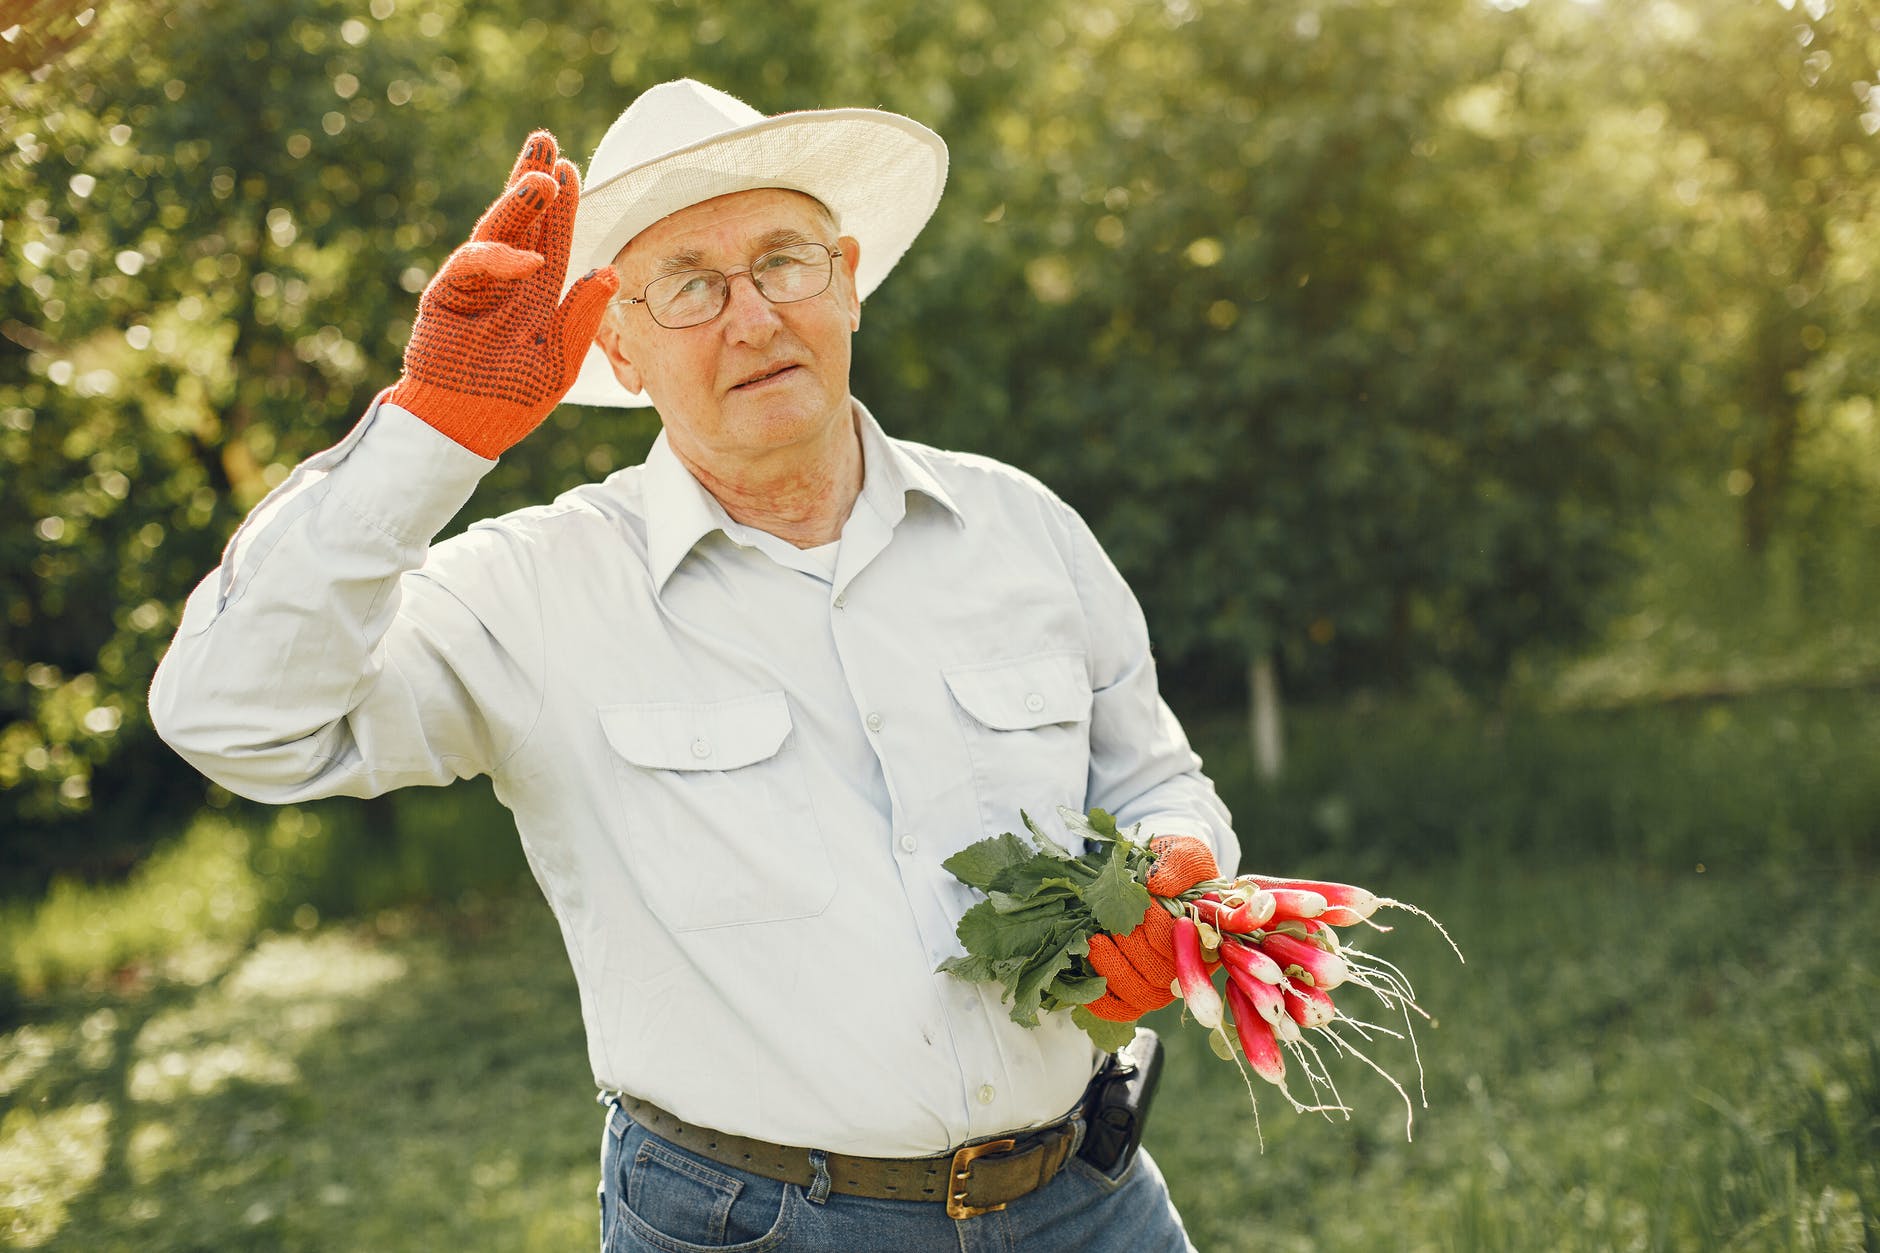 Man in gardening clothes with a handful of radishes | Source: Pexels